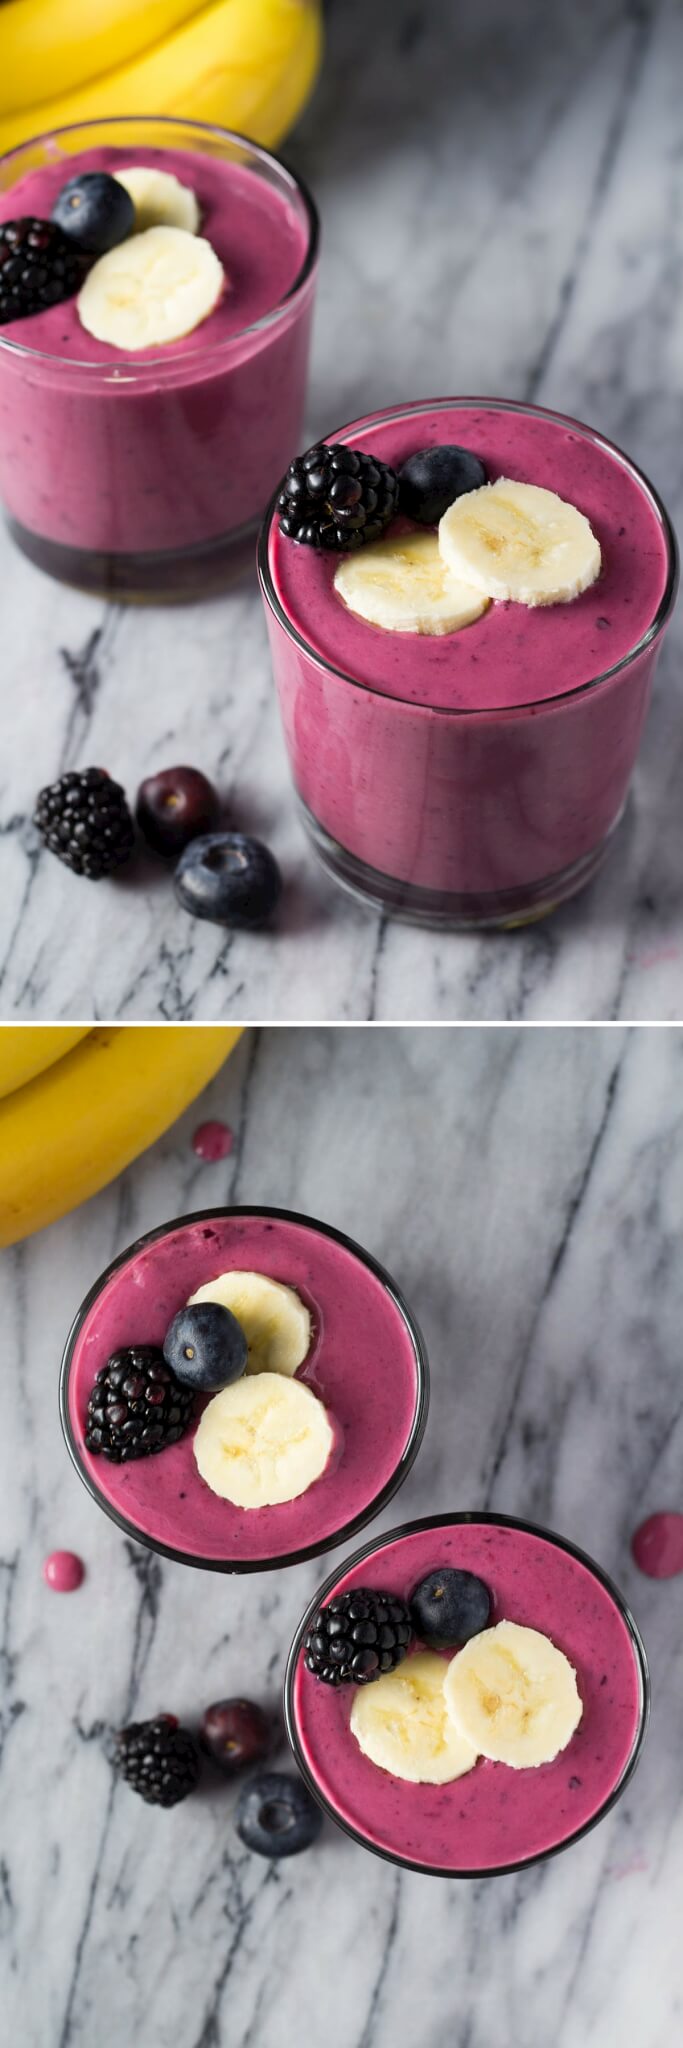 Super healthy, 4 ingredient Berry Pomegranate Smoothie. Made with Greek yogurt & banana - you'll love this healthy, flu-fighting breakfast!